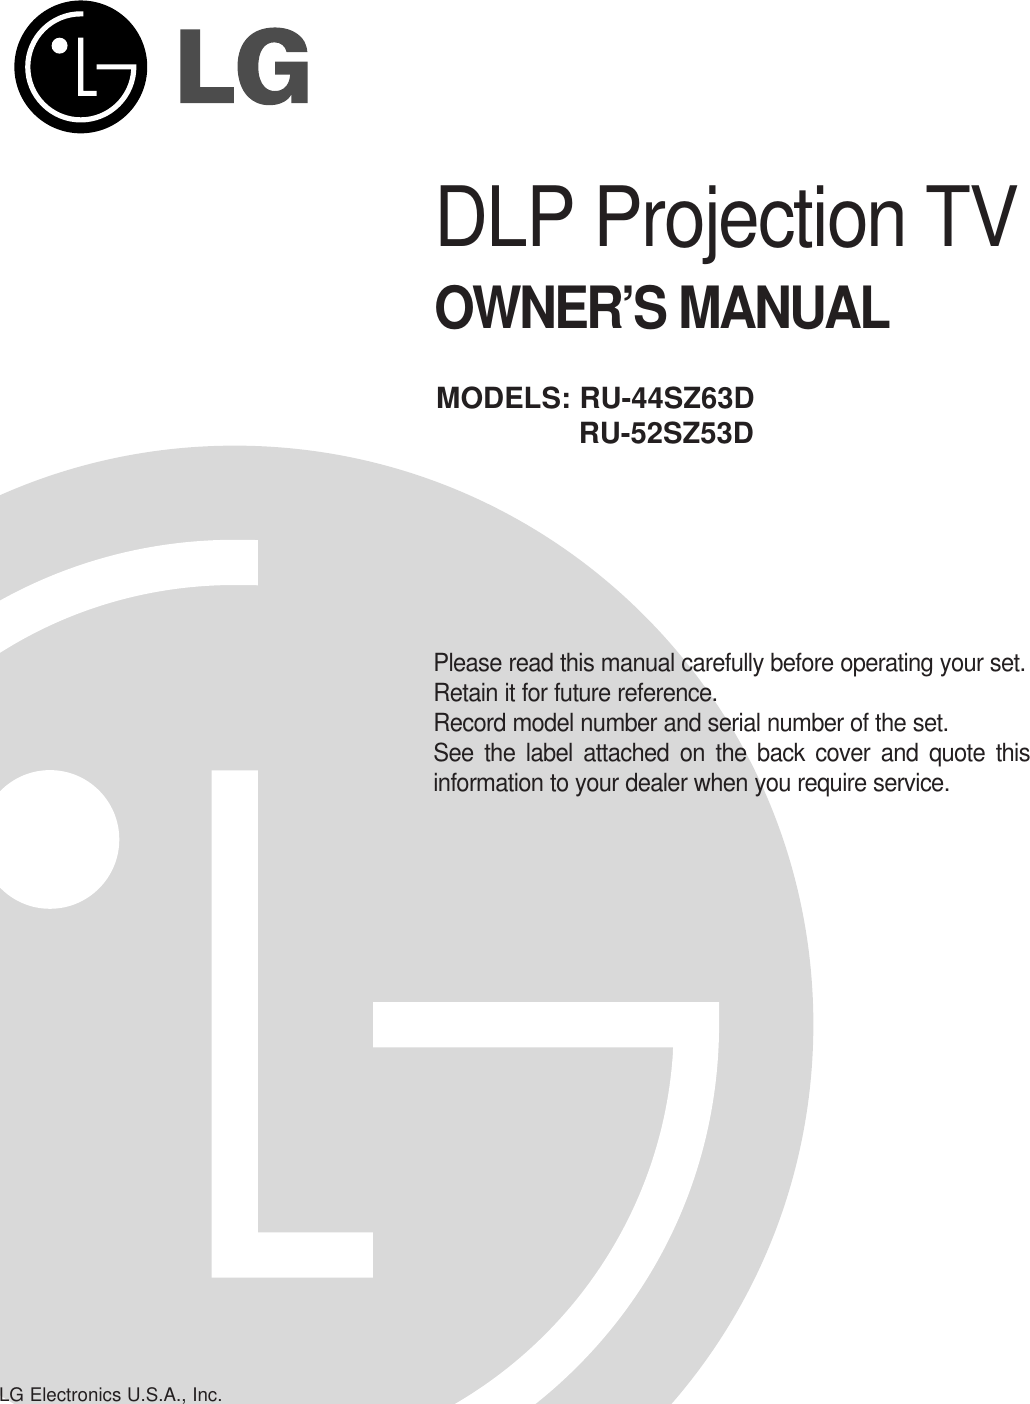 DLP Projection TVOWNER’S MANUALPlease read this manual carefully before operating your set. Retain it for future reference.Record model number and serial number of the set. See the label attached on the back cover and quote thisinformation to your dealer when you require service.MODELS: RU-44SZ63DRU-52SZ53DLG Electronics U.S.A., Inc.